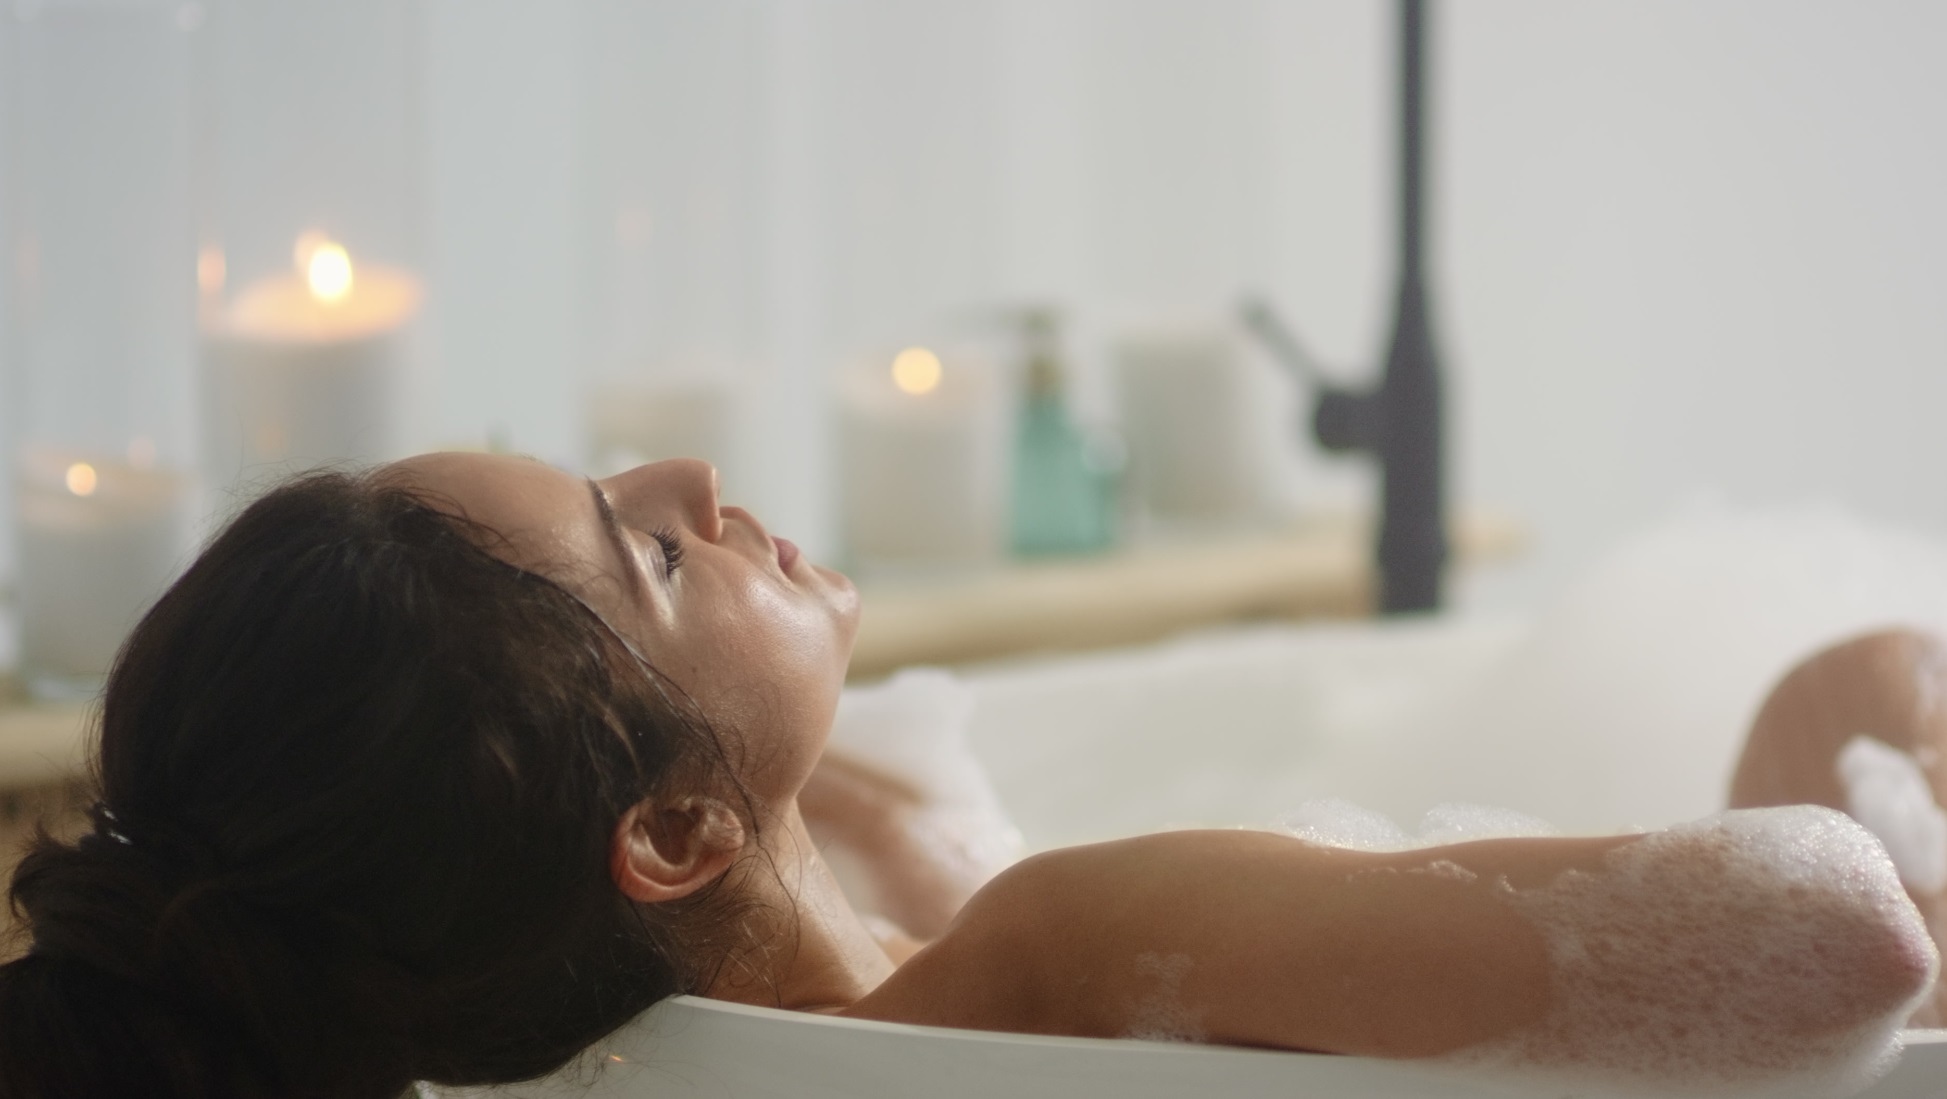 Baths for good luck 3 options that attract prosperity into your life